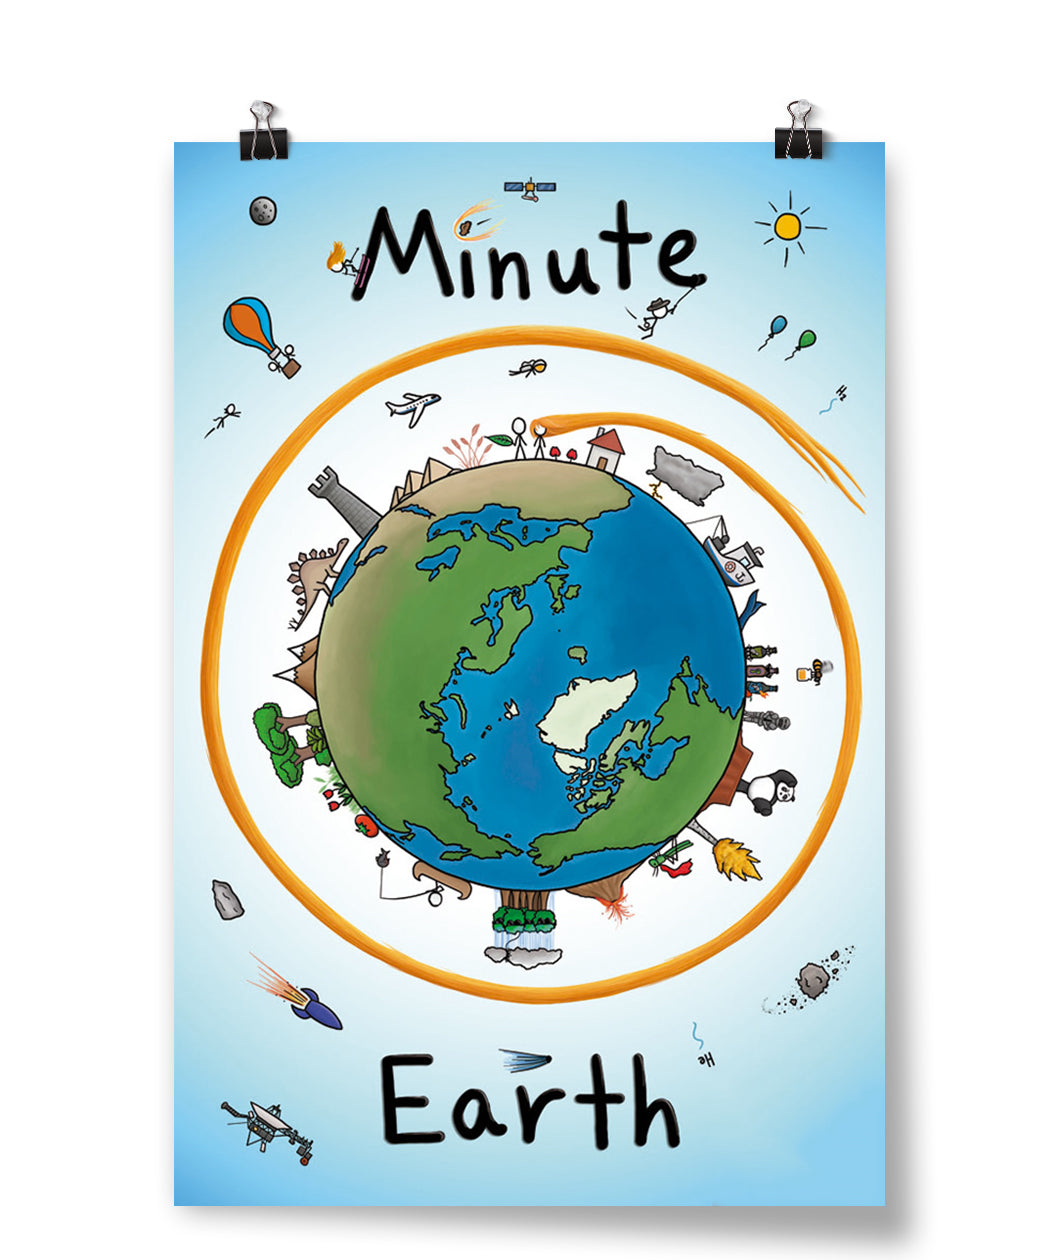 A poster showing earth with different pieces of life (panda, ship, castle, dinosaur) all standing on the outer edge. In the sky is the sun, spaceships, hot air balloon, etc. "Minute Earth" is written in black on the poster. 